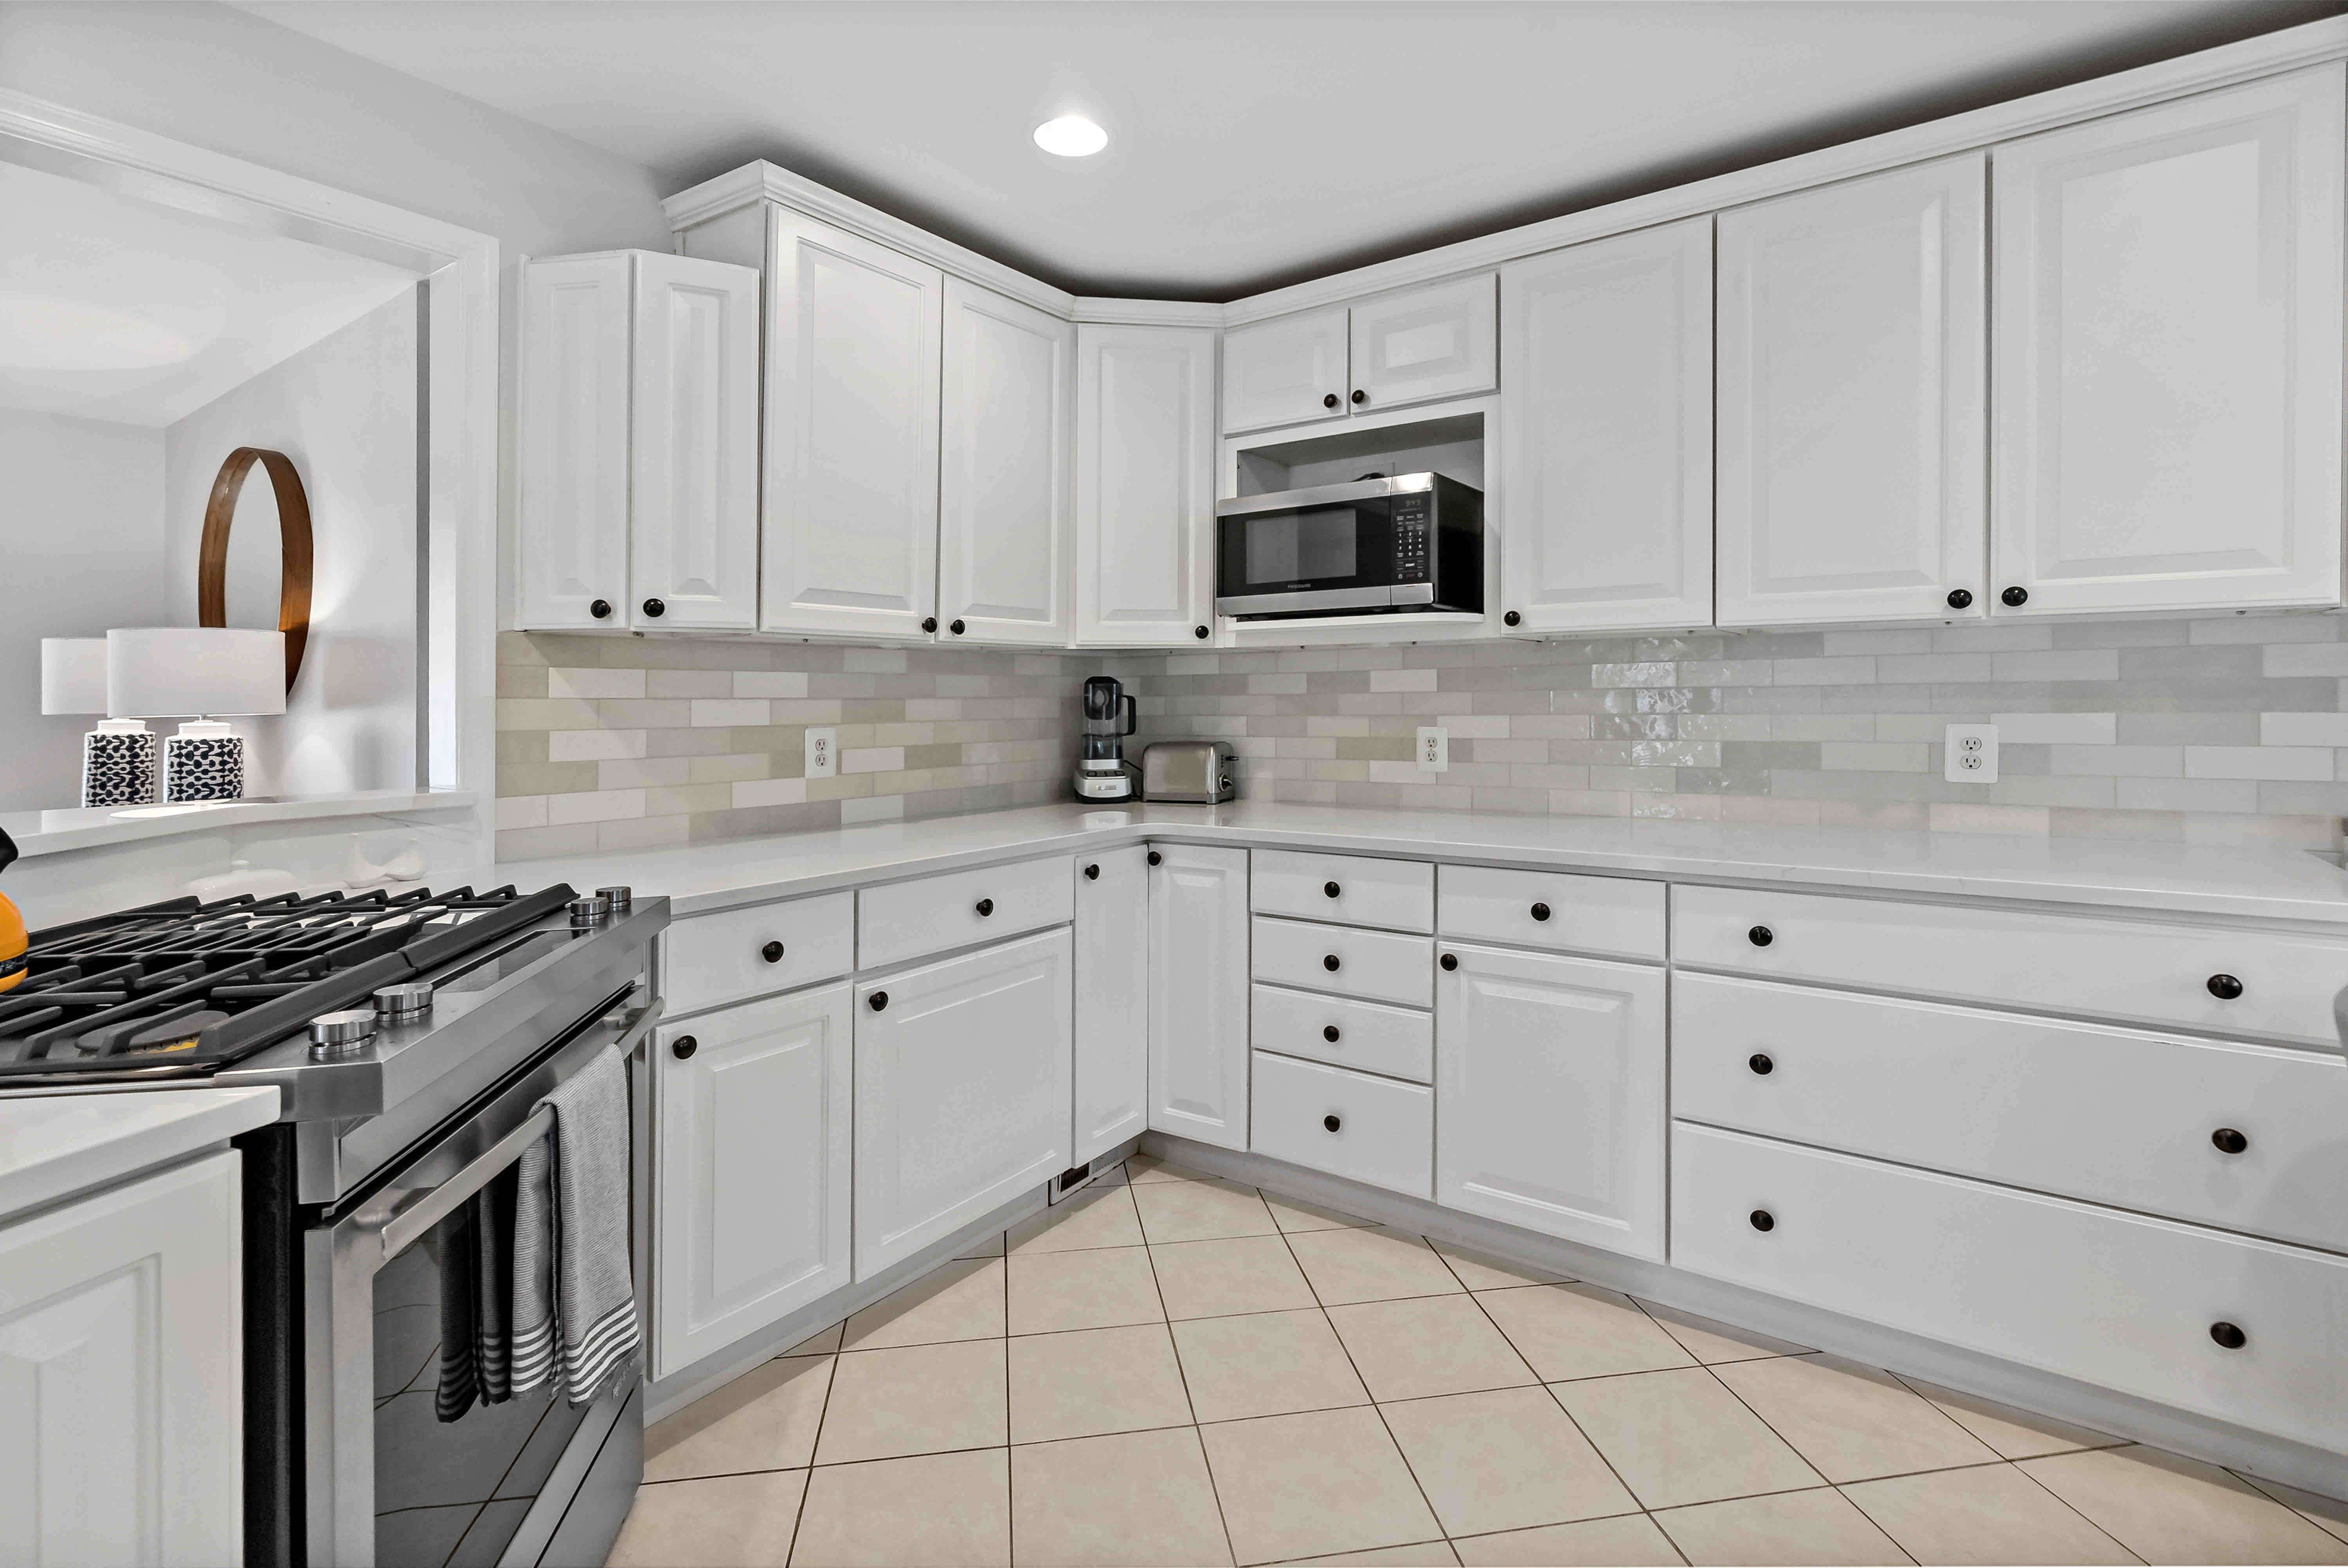 White kitchen cabinets and black handles